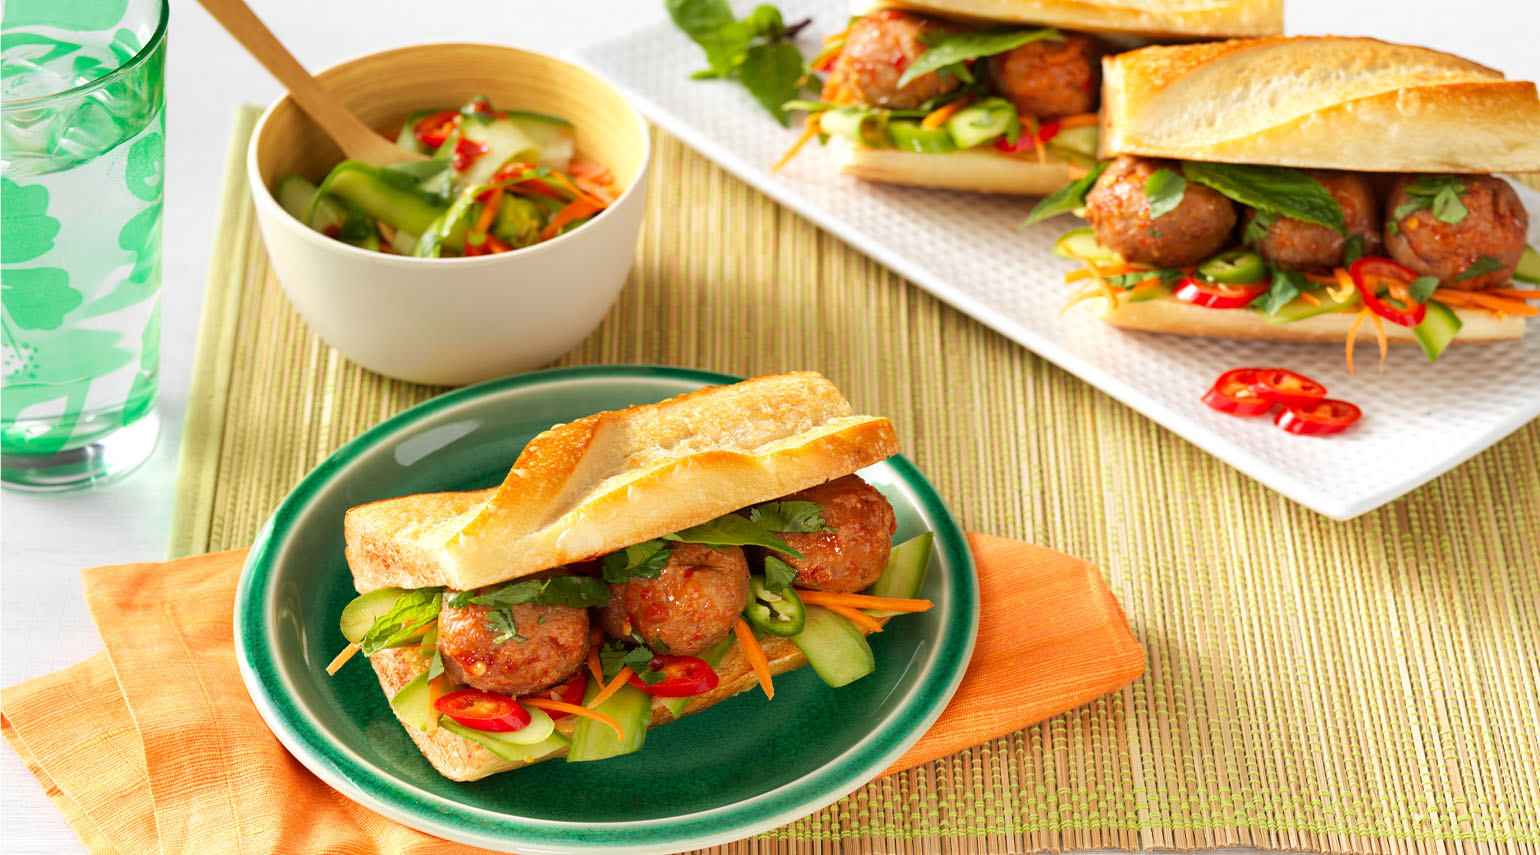 Vegan Banh Meatball with Tangy Herb Slaw